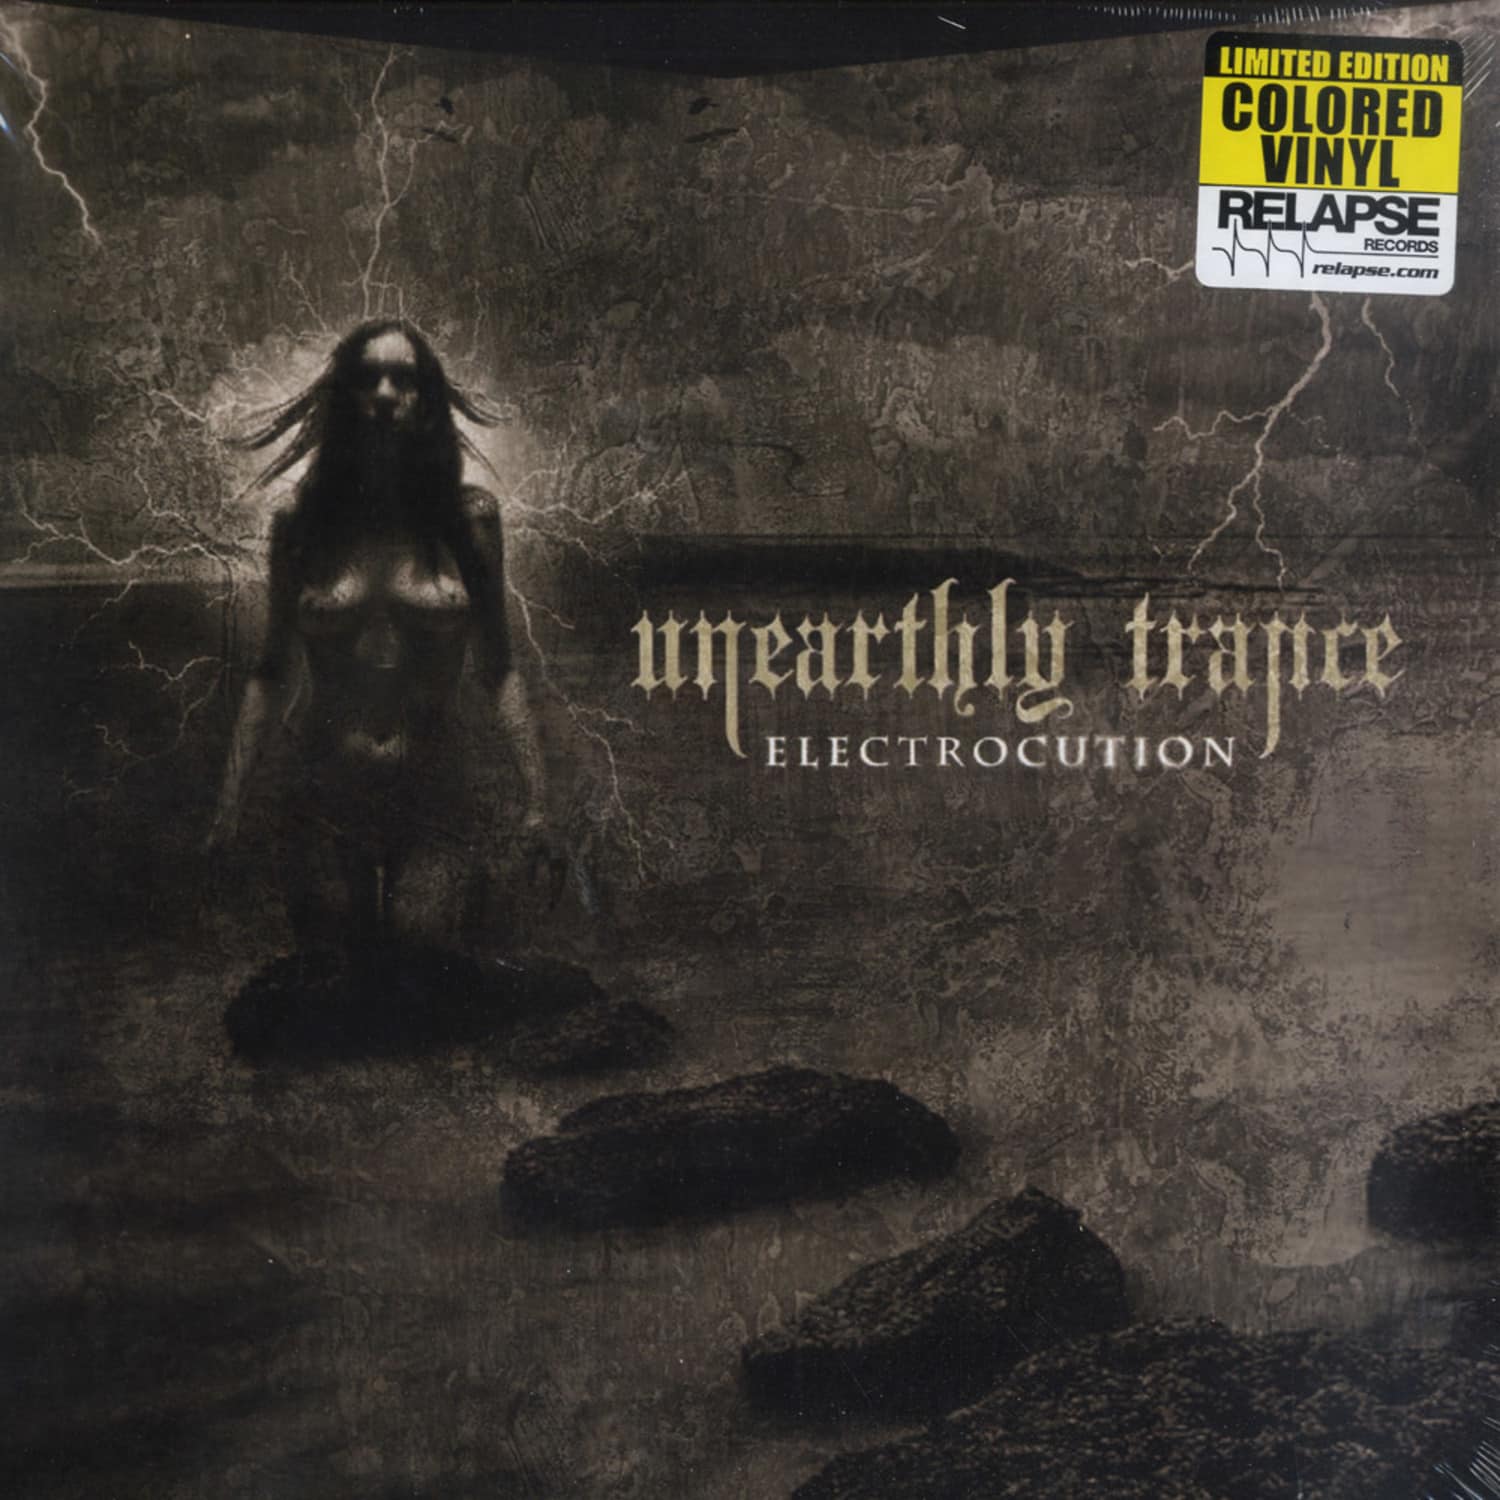 Unearthly Trance - ELECTROCUTION 